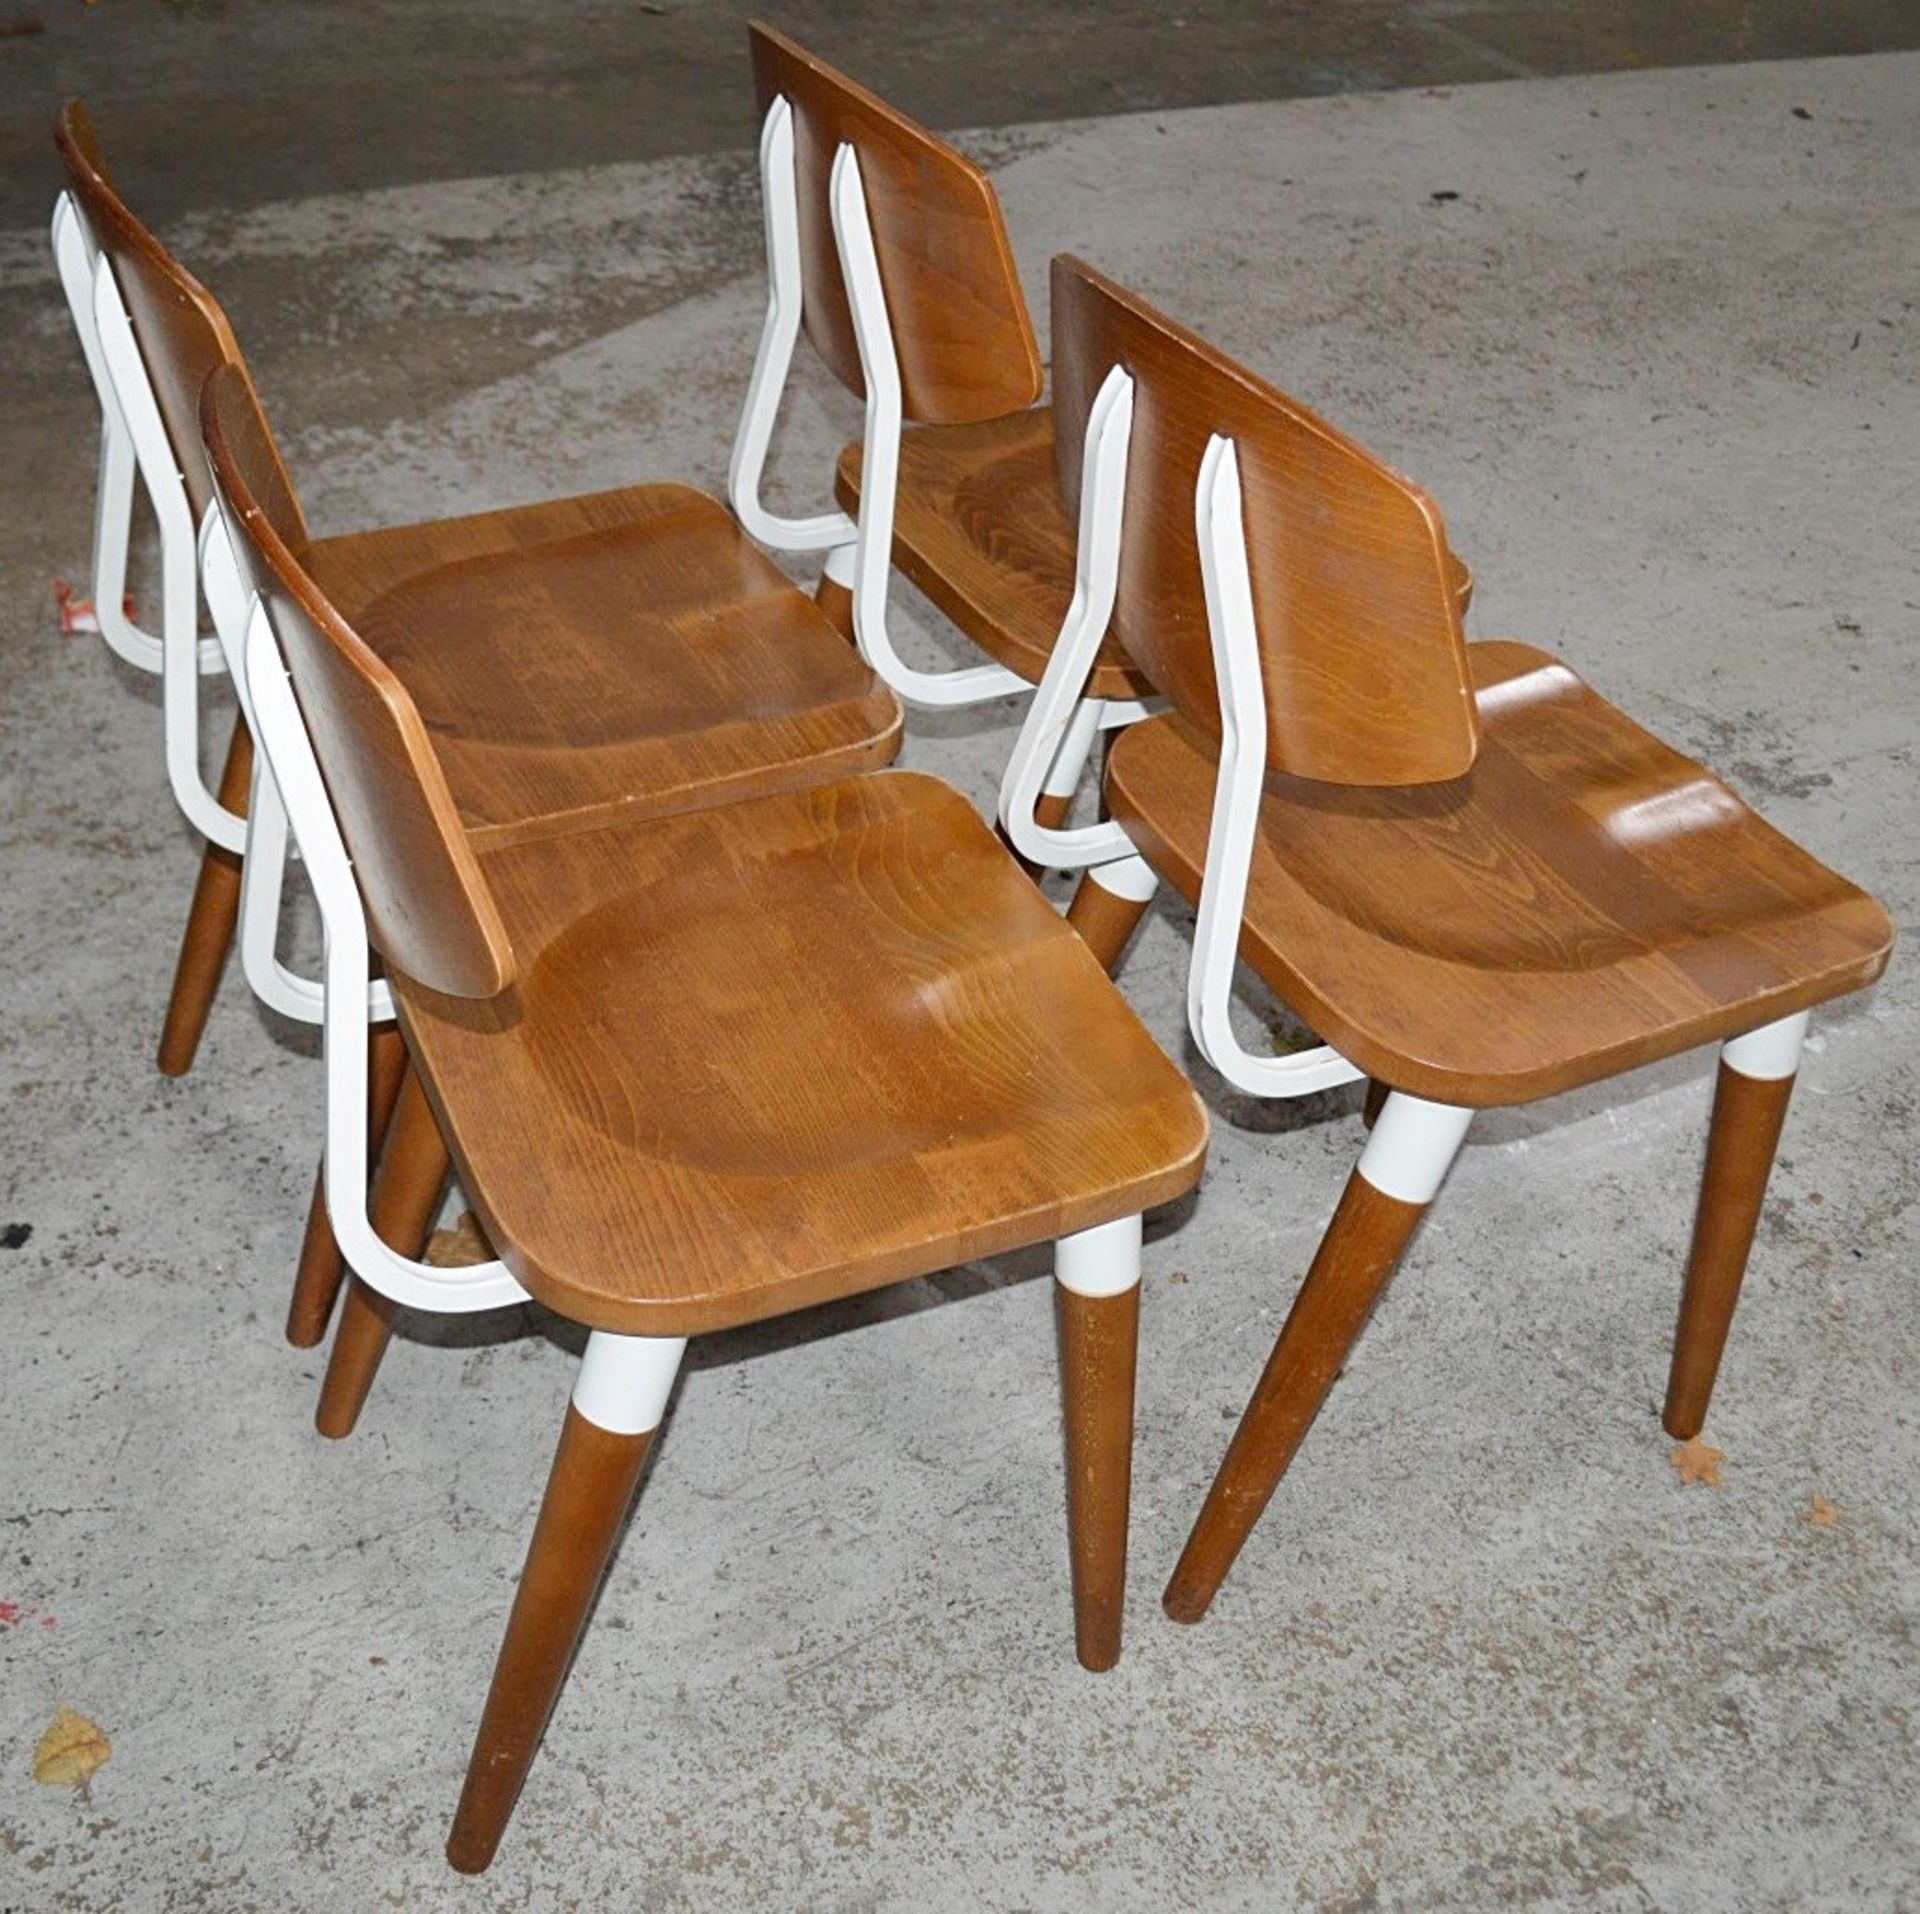 8 x Contemporary Commercial Dining Chairs With A Sturdy Wood And Metal Construction - Image 10 of 10